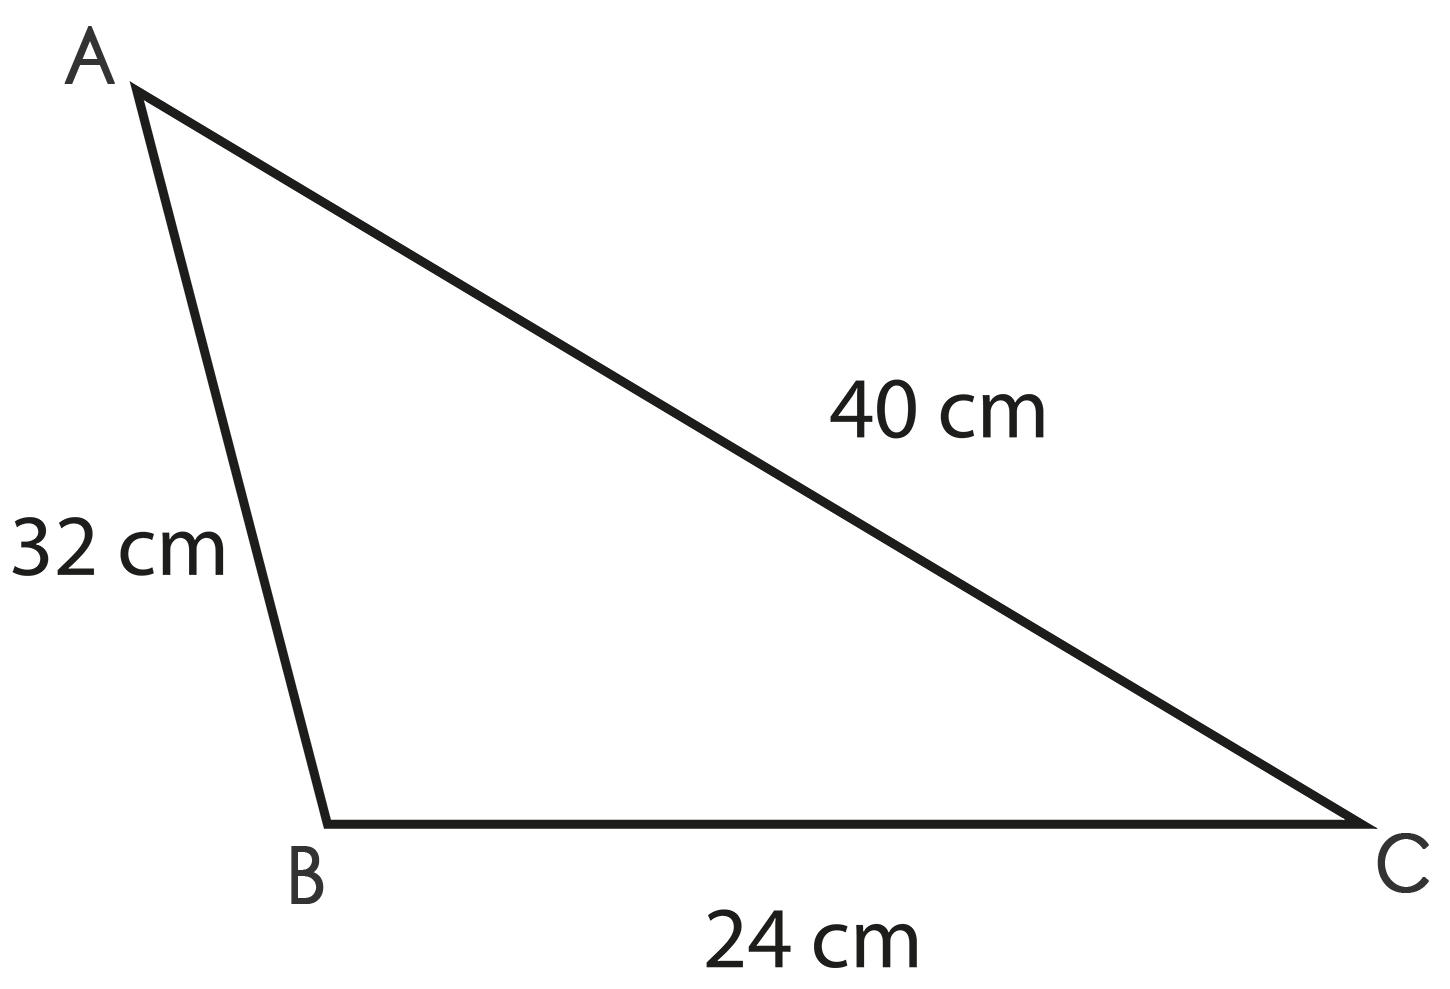 Area of Triangle – by Heron’s Formula